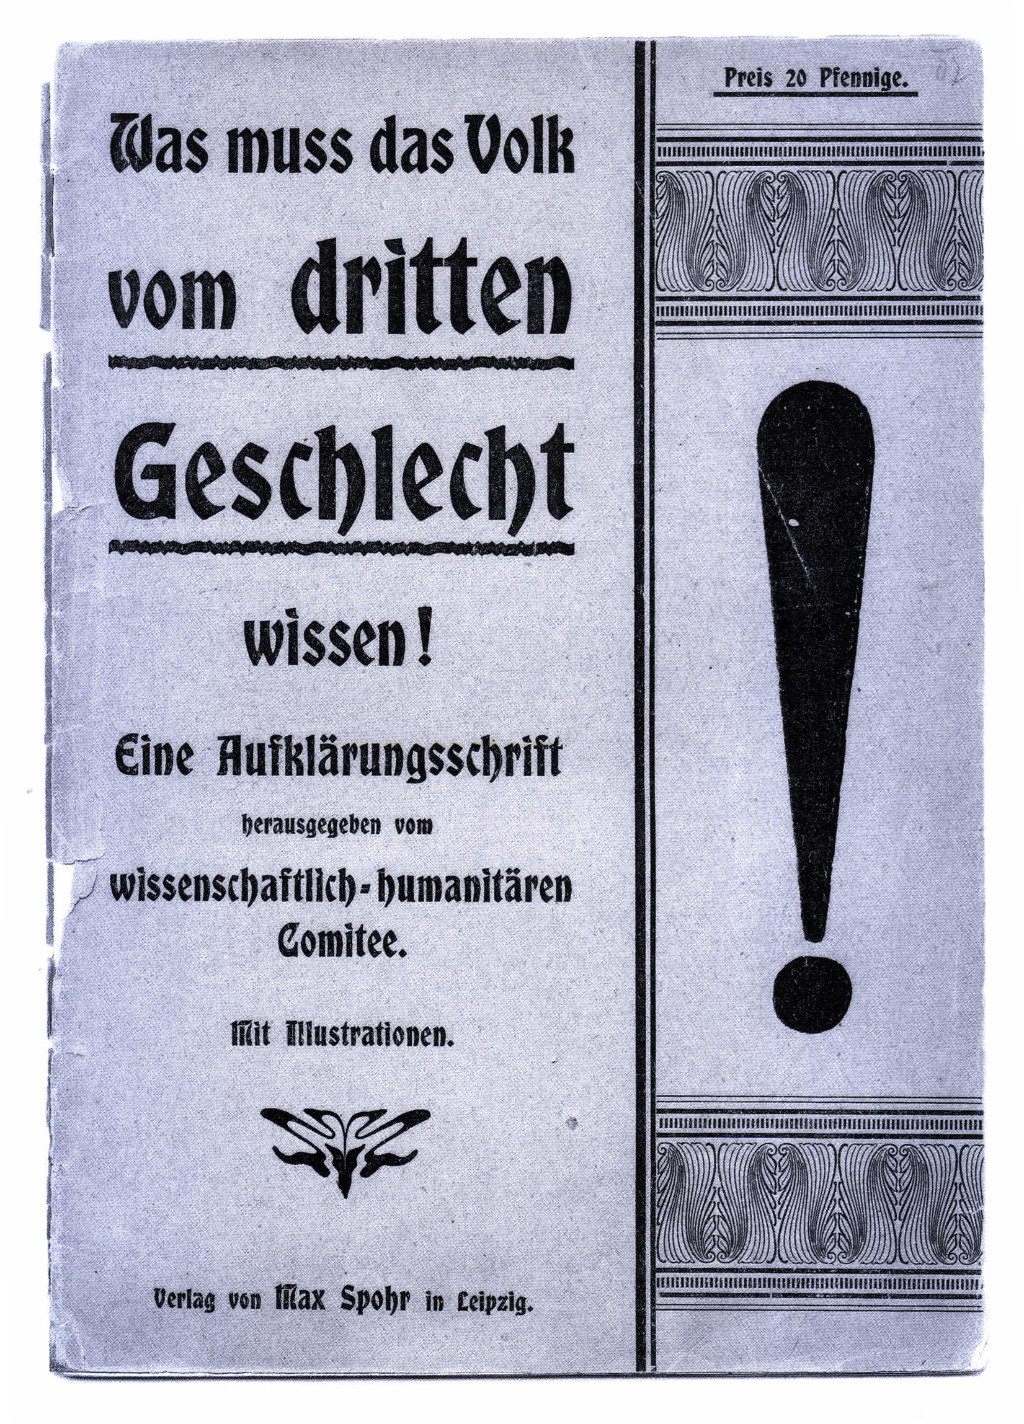 The cover of the brochure on the third gender published by the Scientific-Humanitarian Committee.